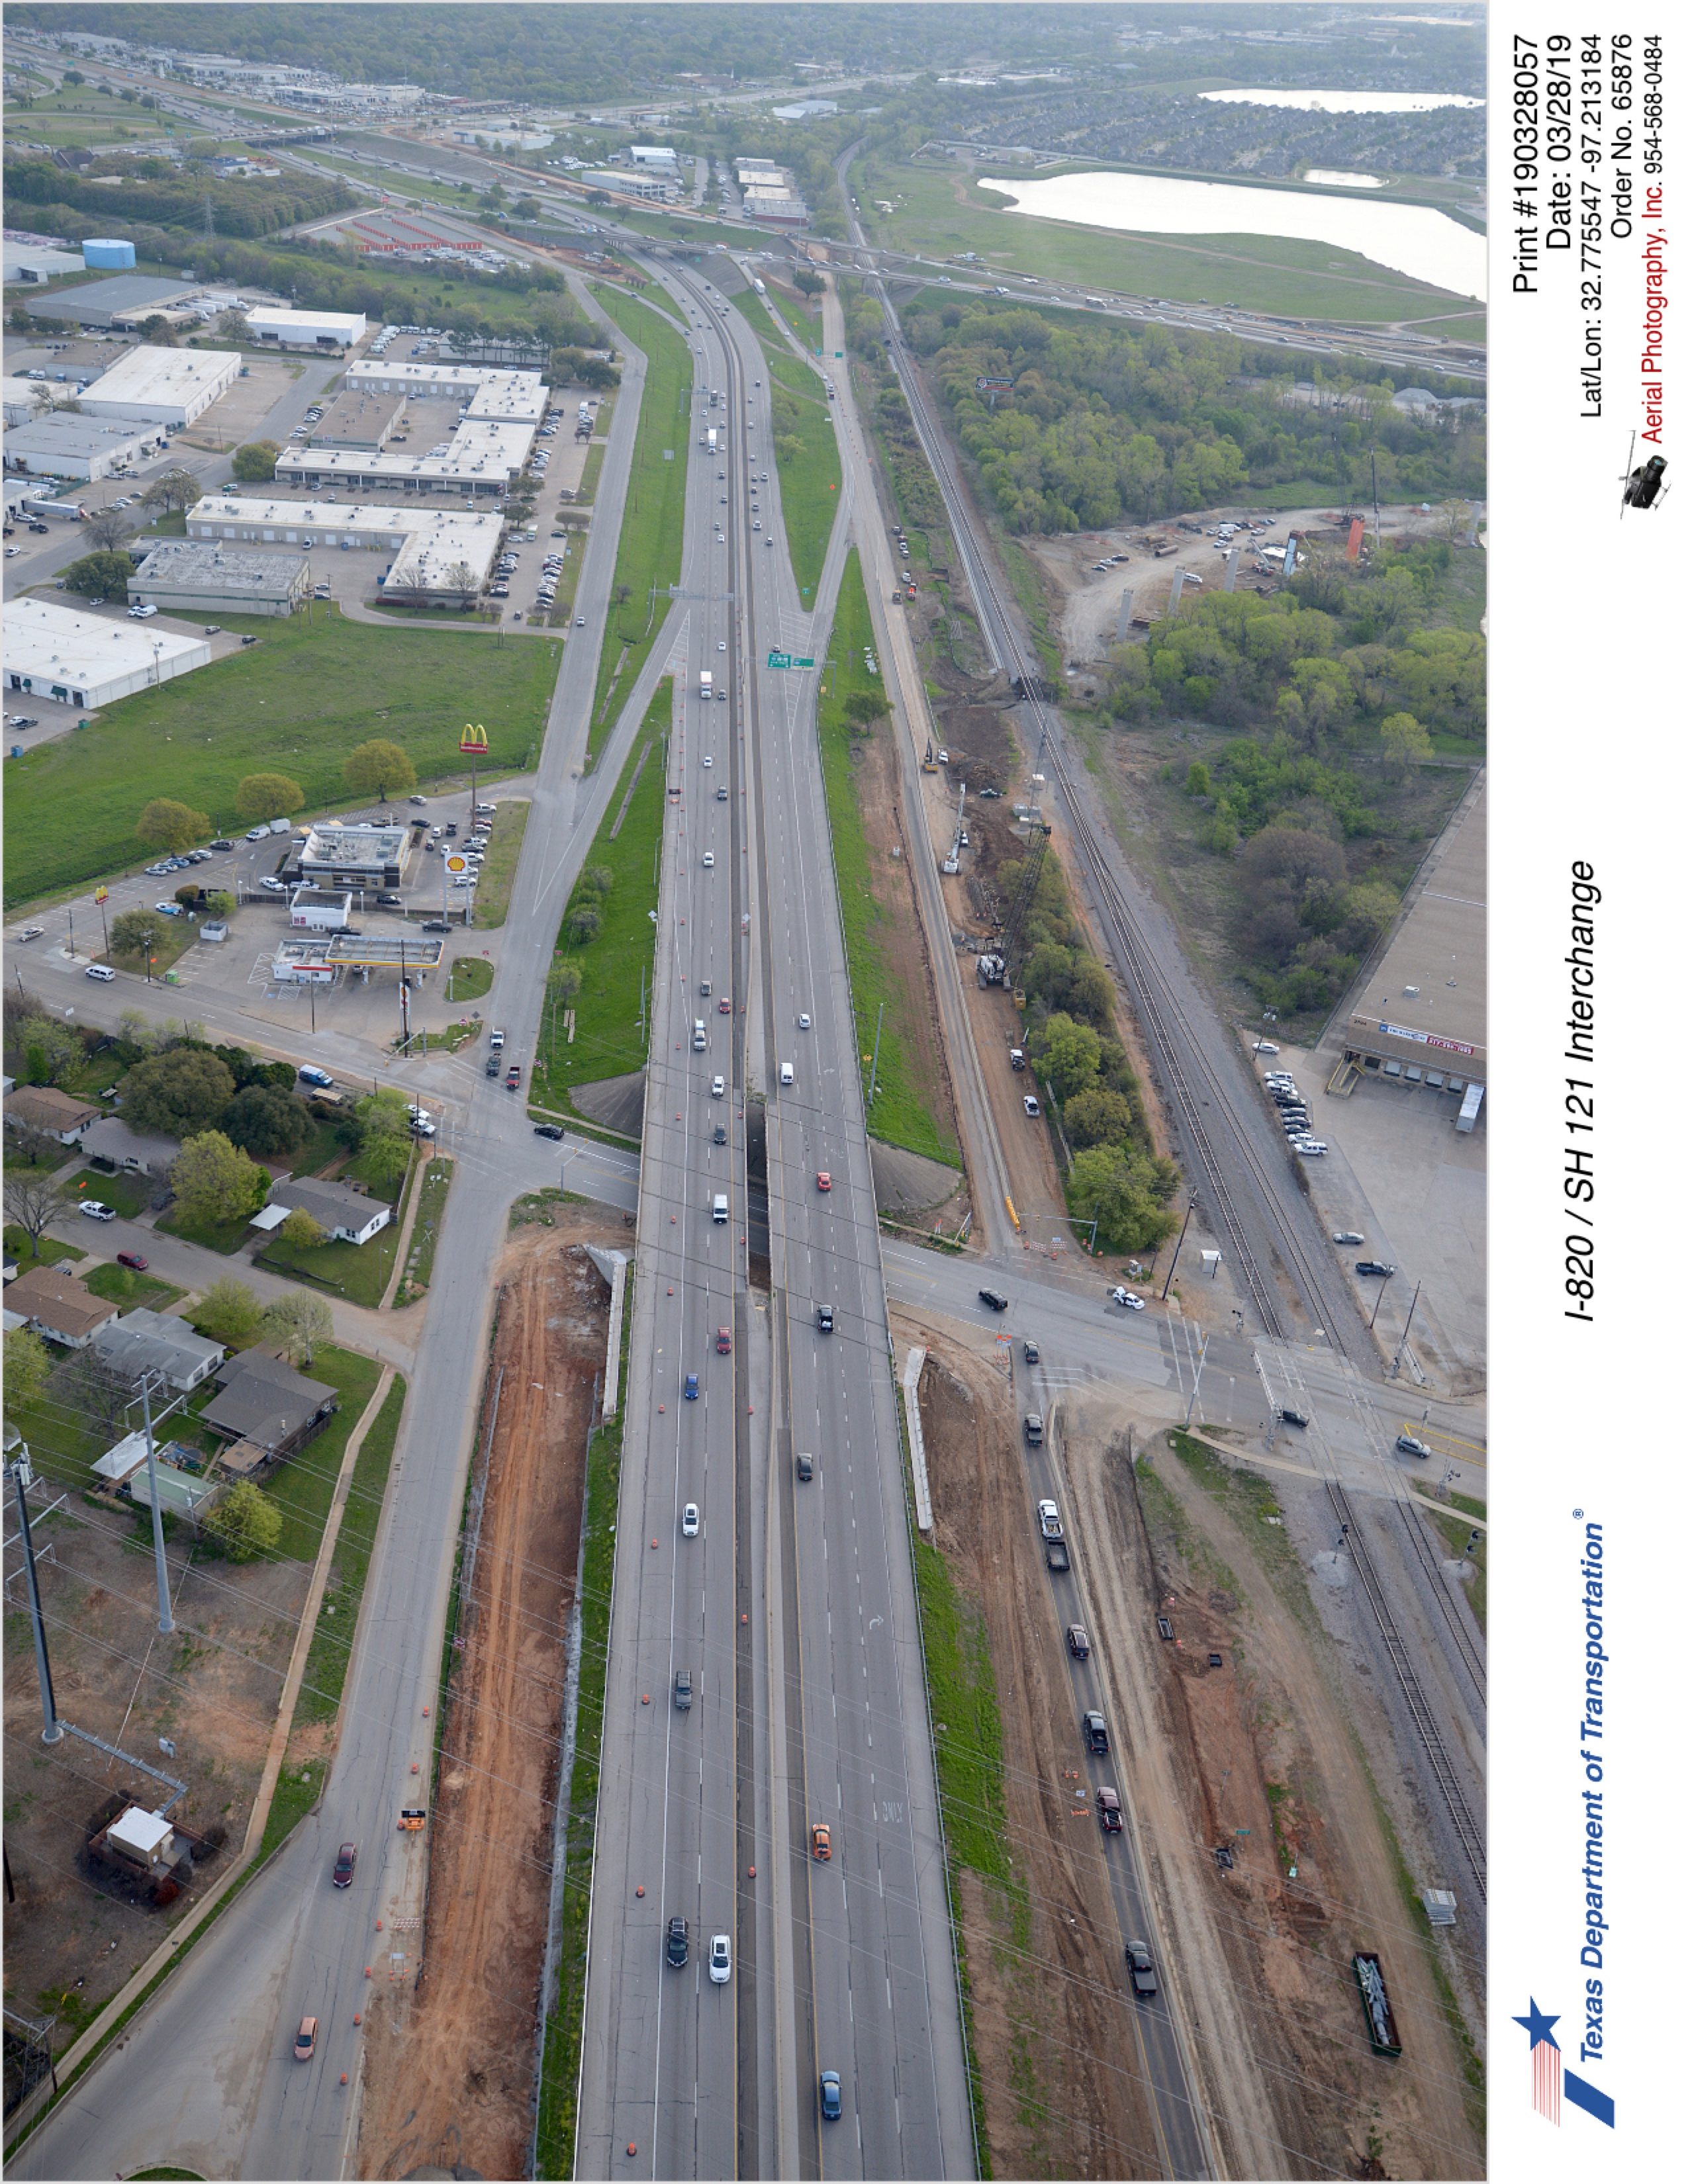 SH 121 looking northeast with Handley-Ederville Road in foreground and I-820 in background.